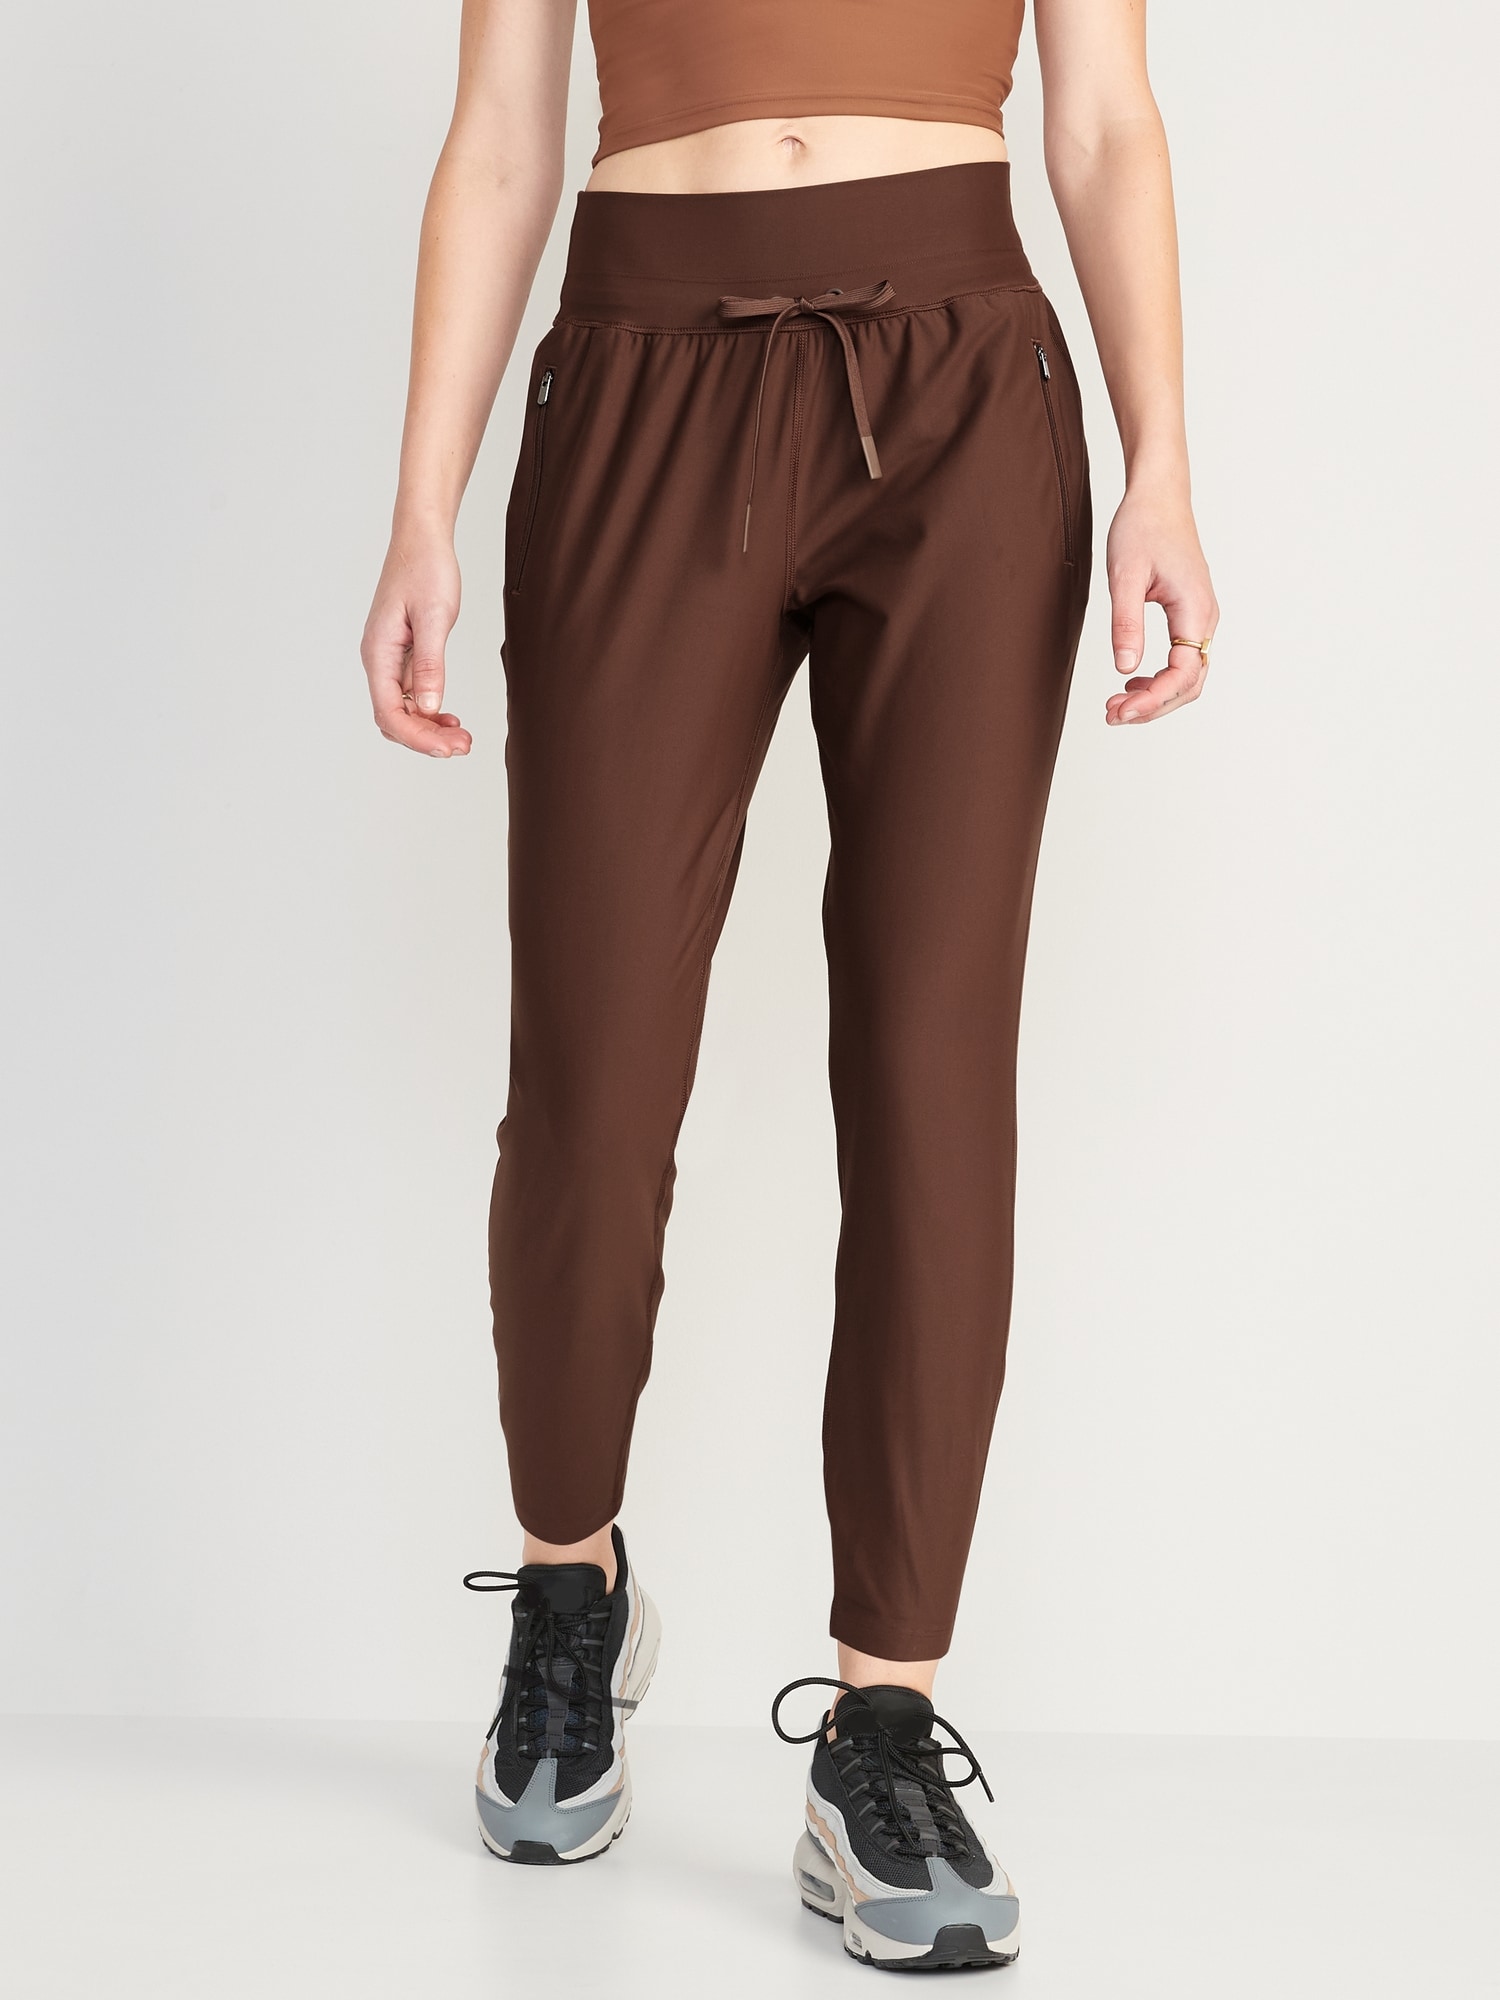 Karu madlavning Thrust High-Waisted PowerSoft Jogger Pants for Women | Old Navy